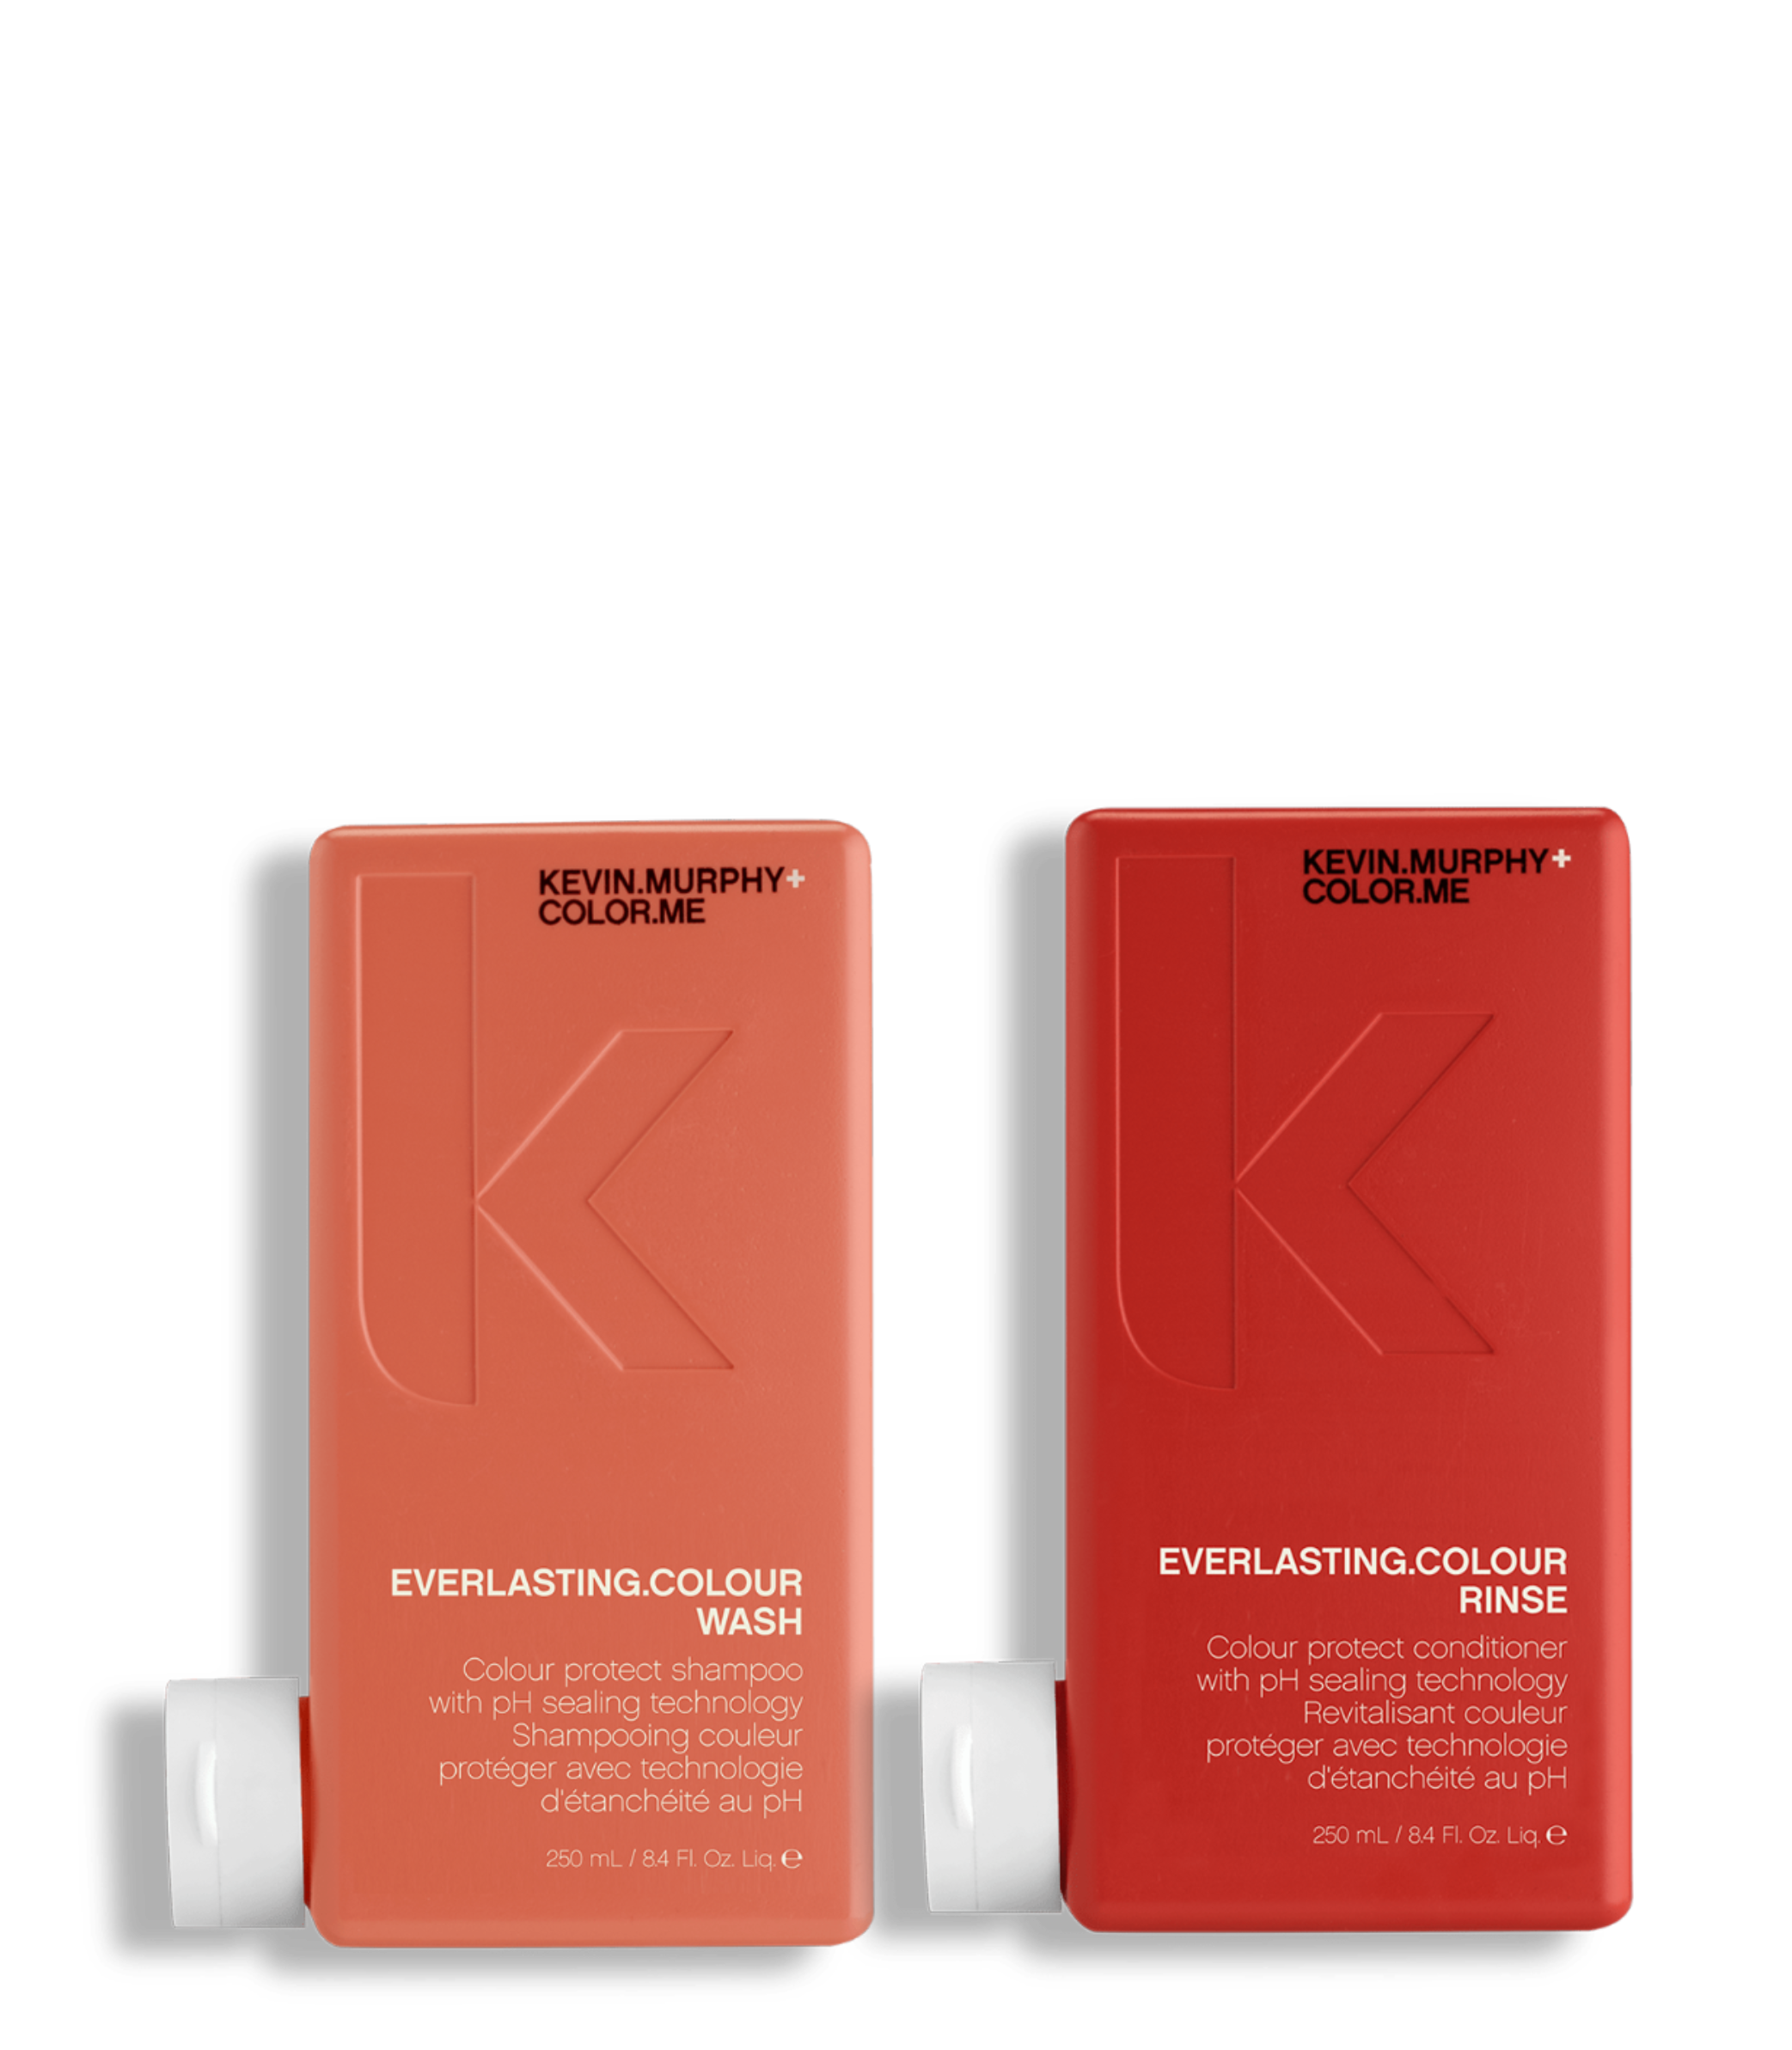 GAMME EVERLASTING COLOUR KEVIN MURPHY